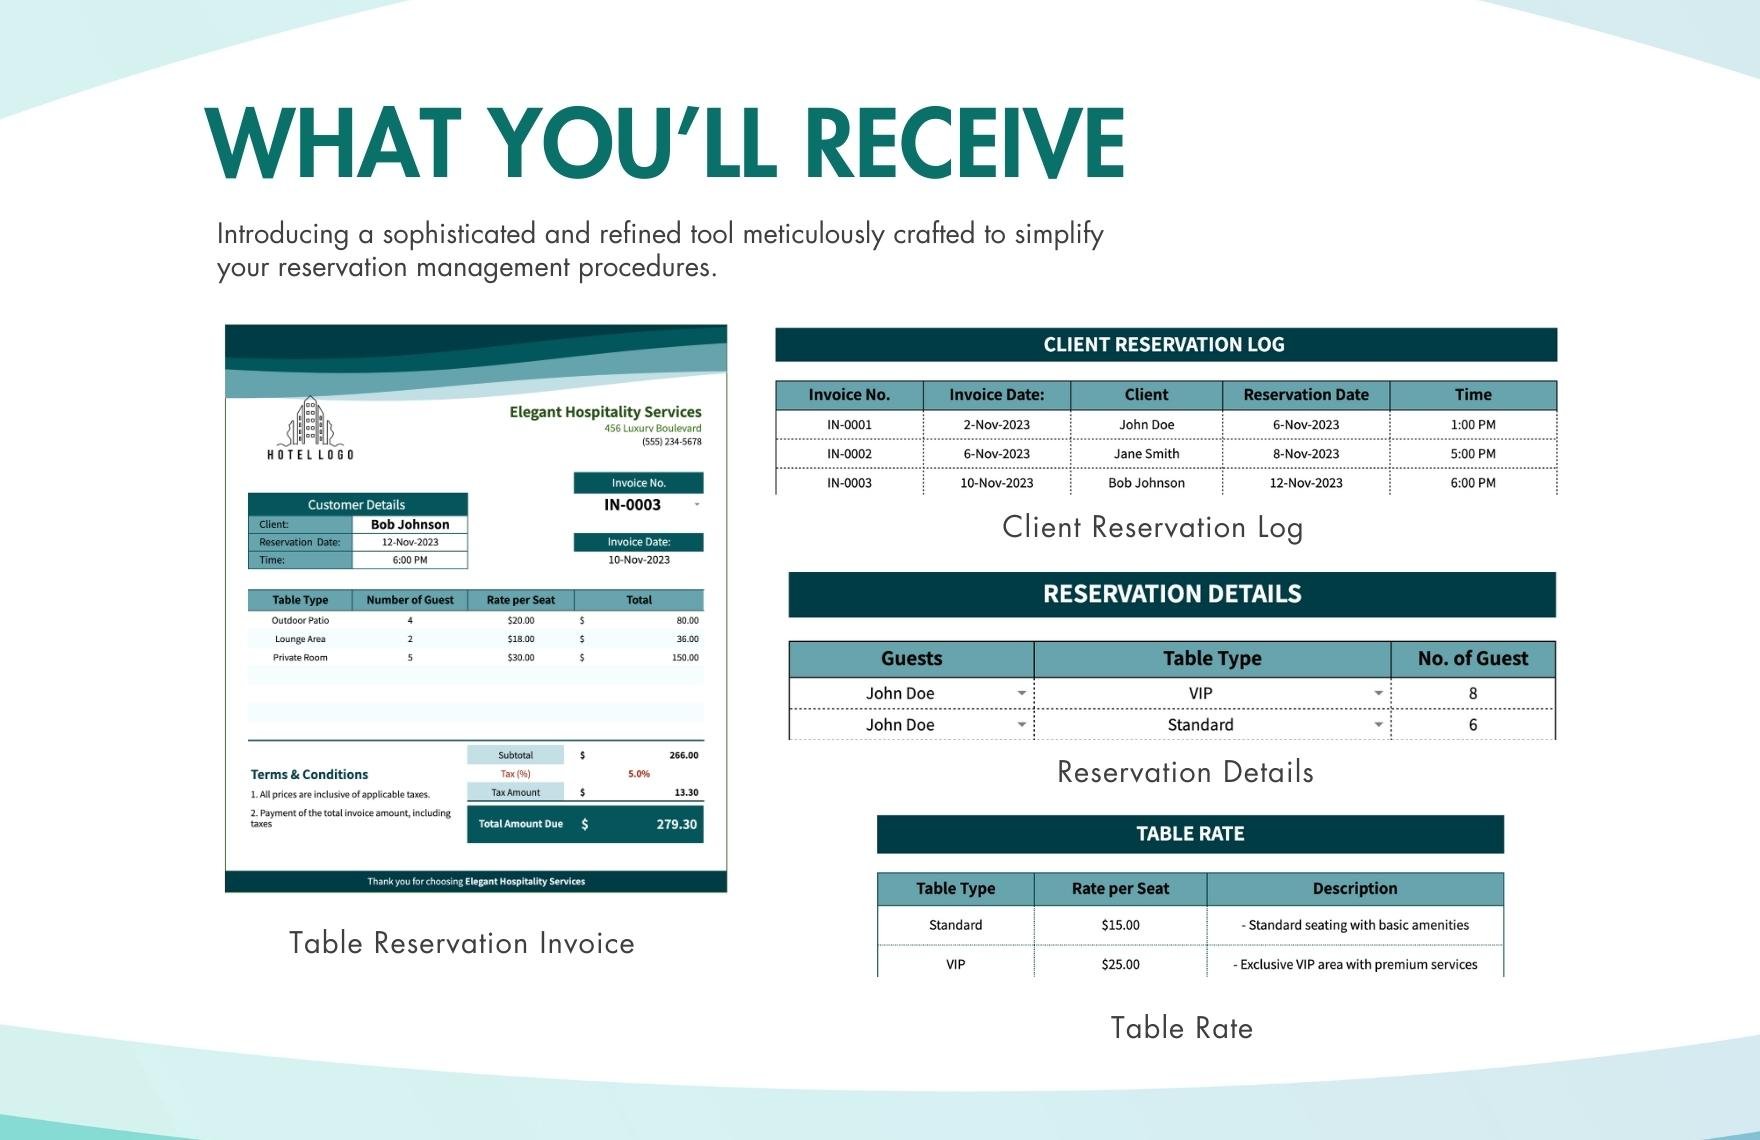 Table Reservation Invoice Template